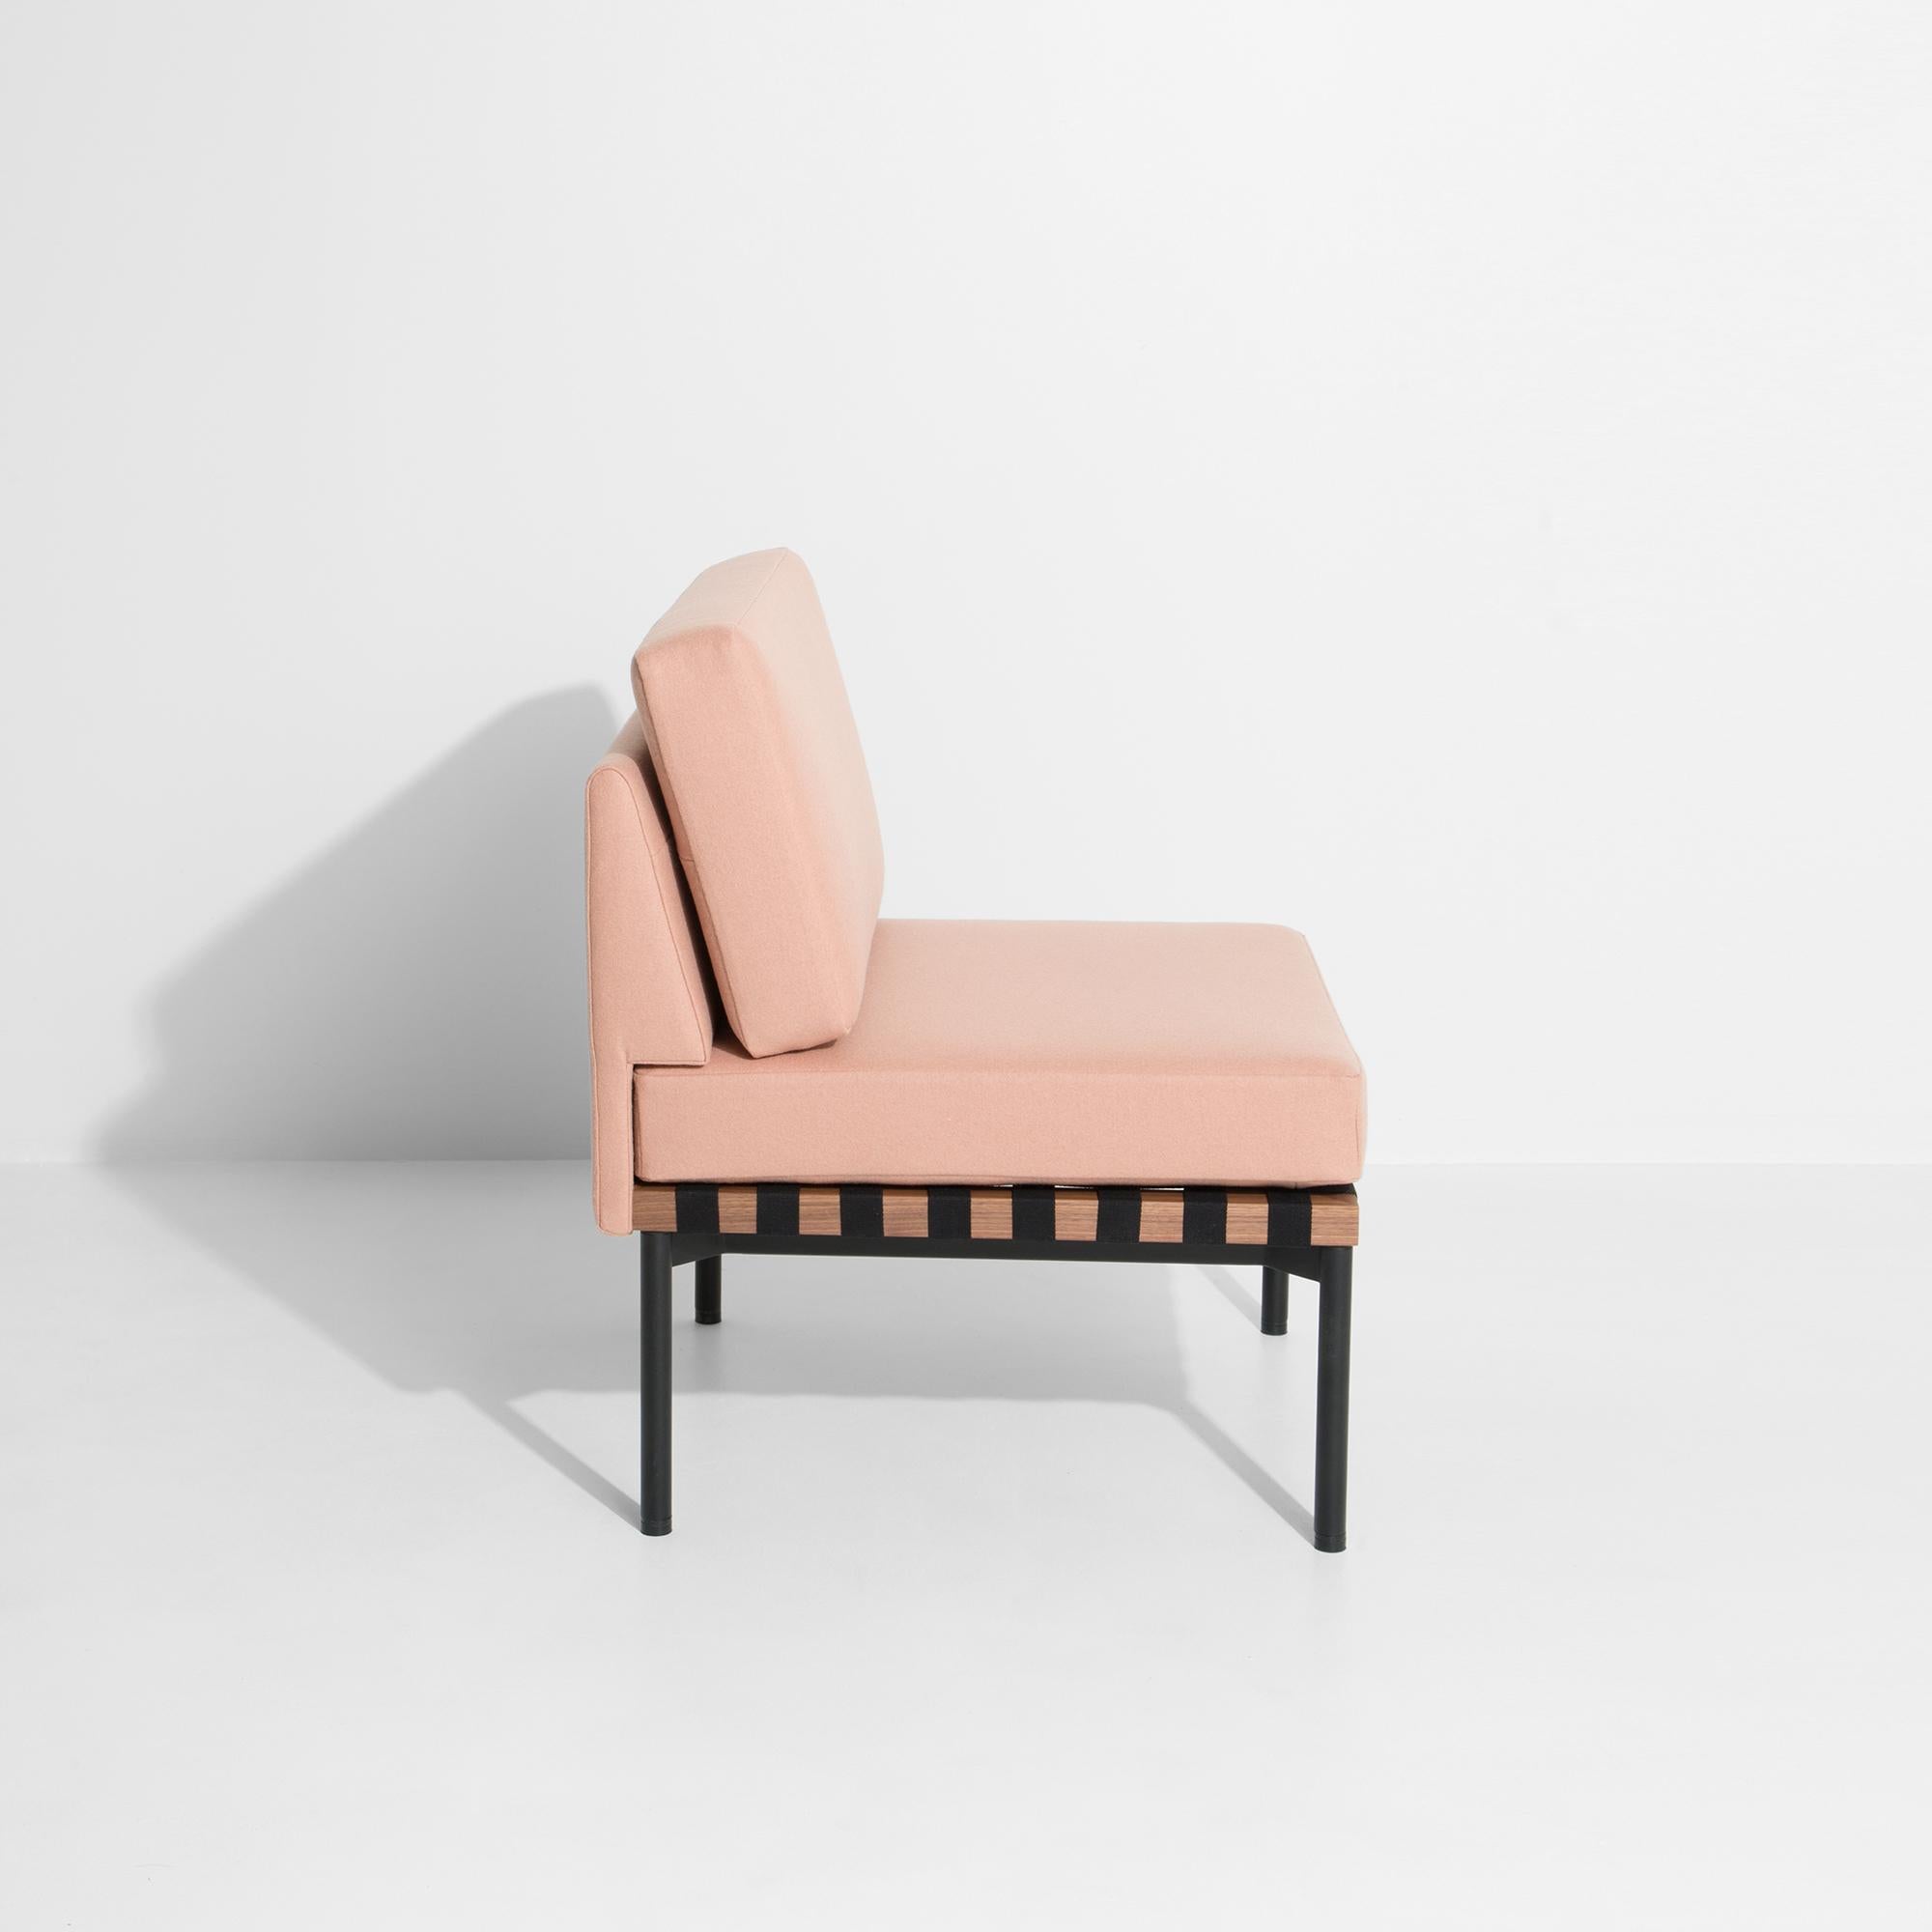 Petite Friture Grid chair without Armrest in Peach by Studio Pool, 2016

Pool designed the Grid collection in reference to the Bauhaus style and in honour of the graphic talents. Each element of this all-modular system retains the identity of the